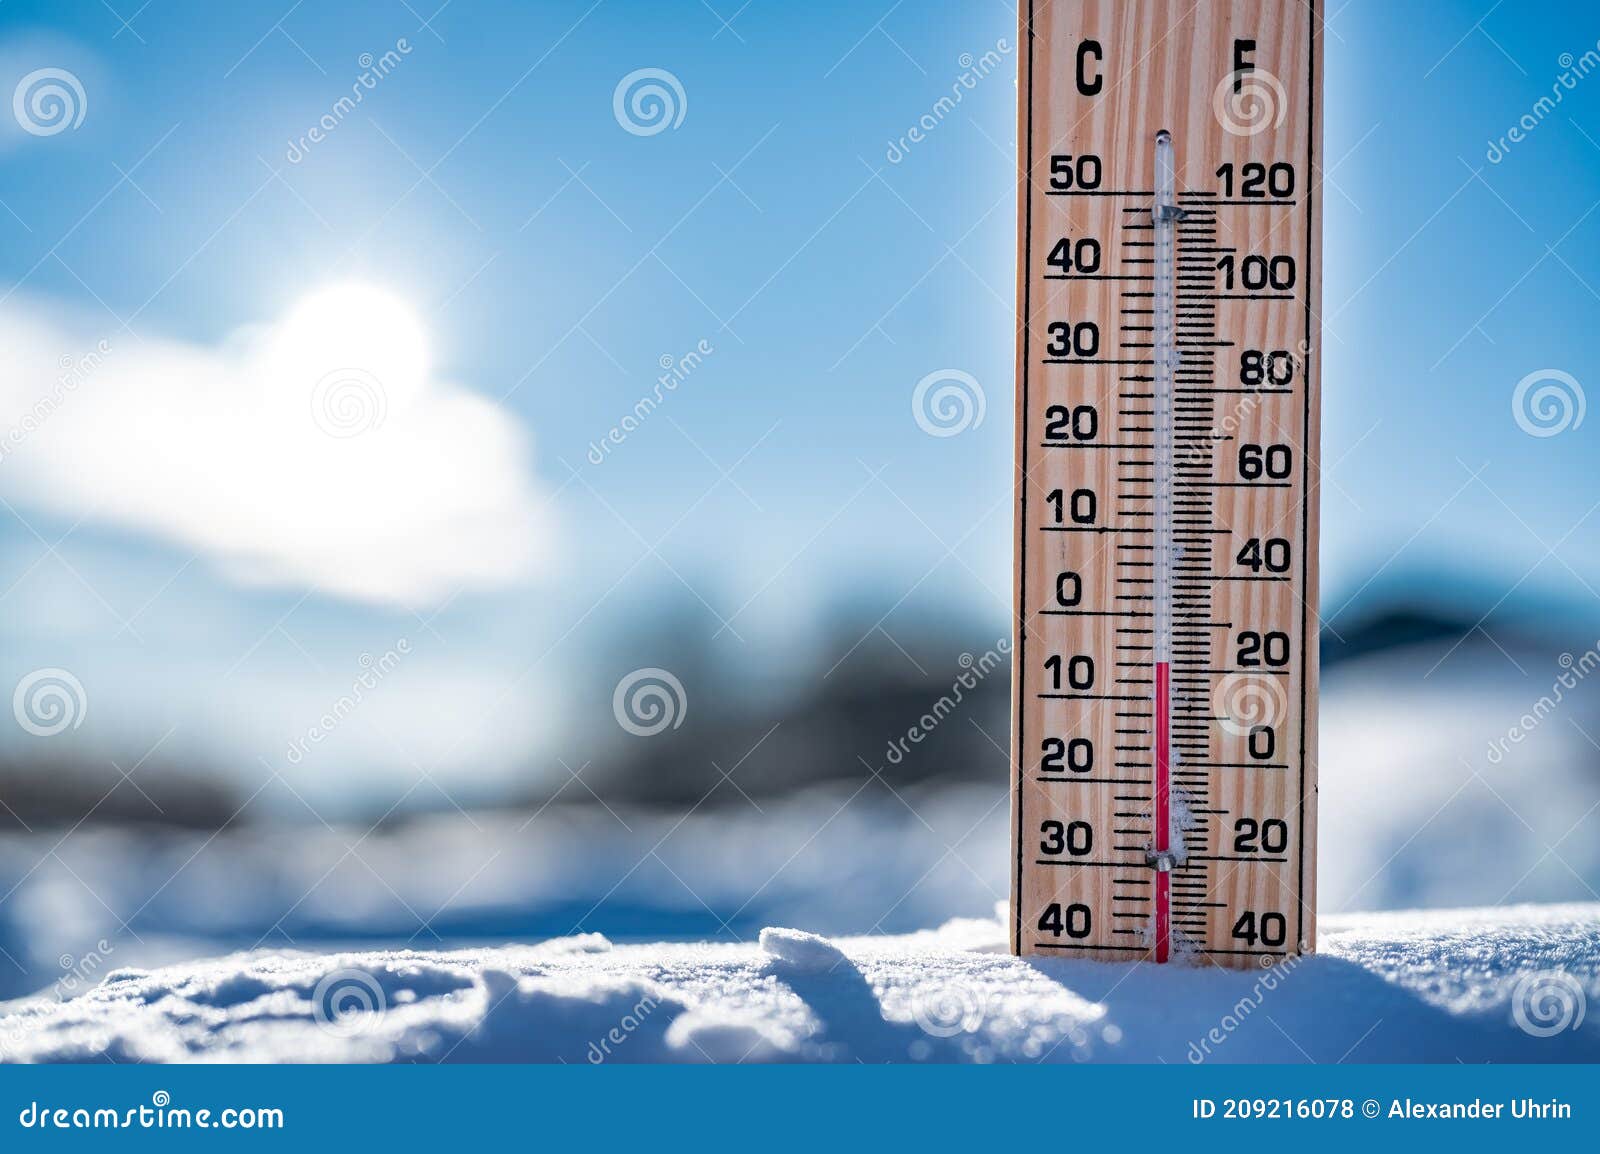 https://thumbs.dreamstime.com/z/winter-time-thermometer-snow-shows-low-temperatures-celsius-209216078.jpg